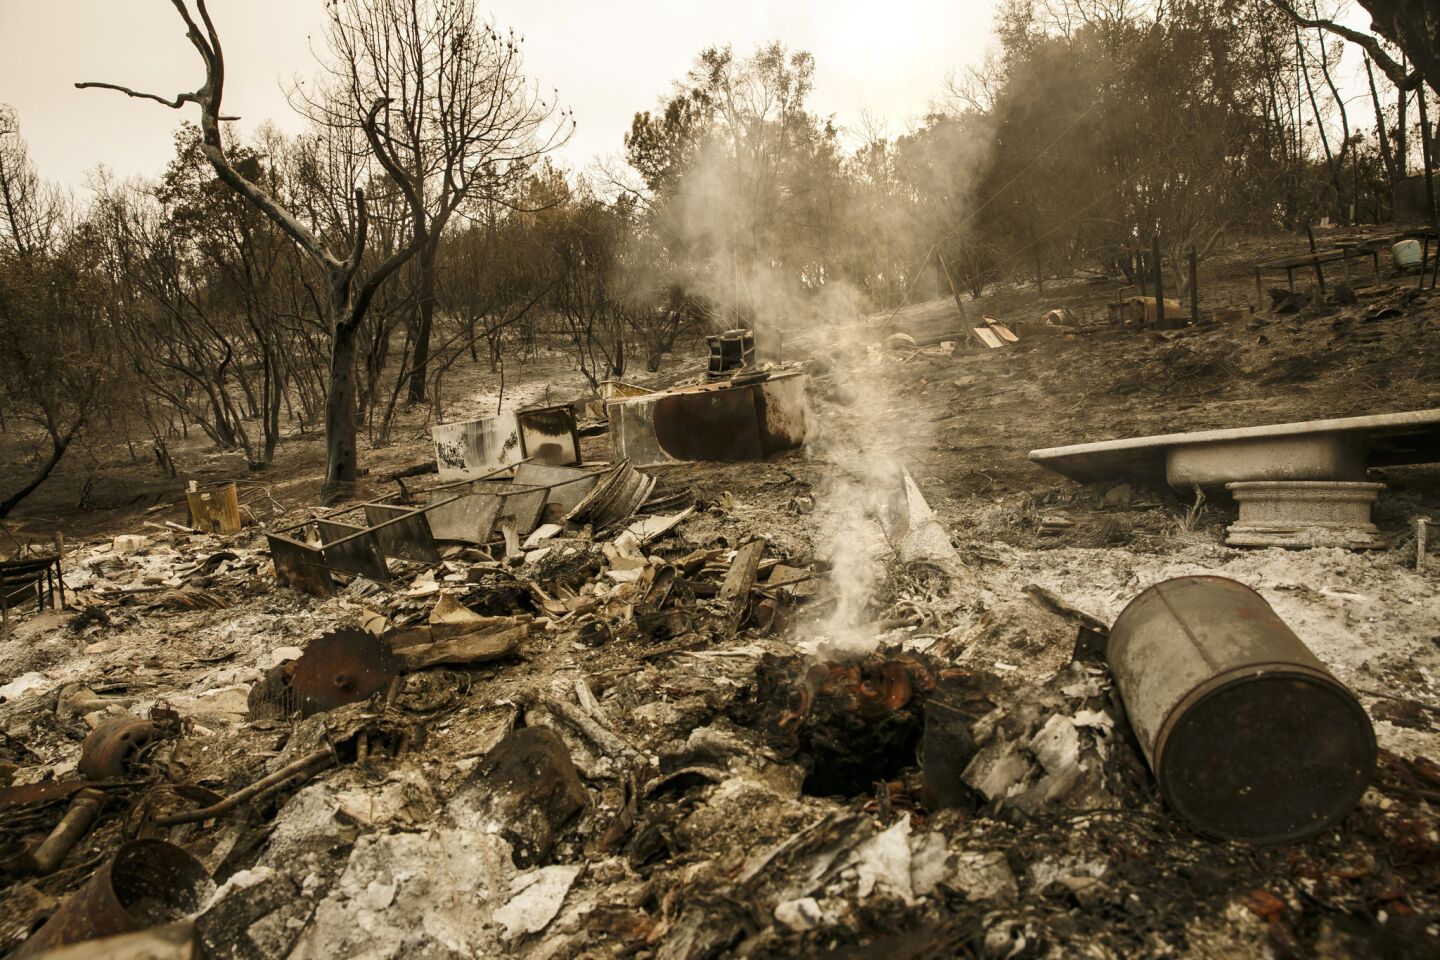 The ruins of a residential neighborhood along Highway 140 lie smoldering after the Detwiler wildfire burned through the area outside of Mariposa.